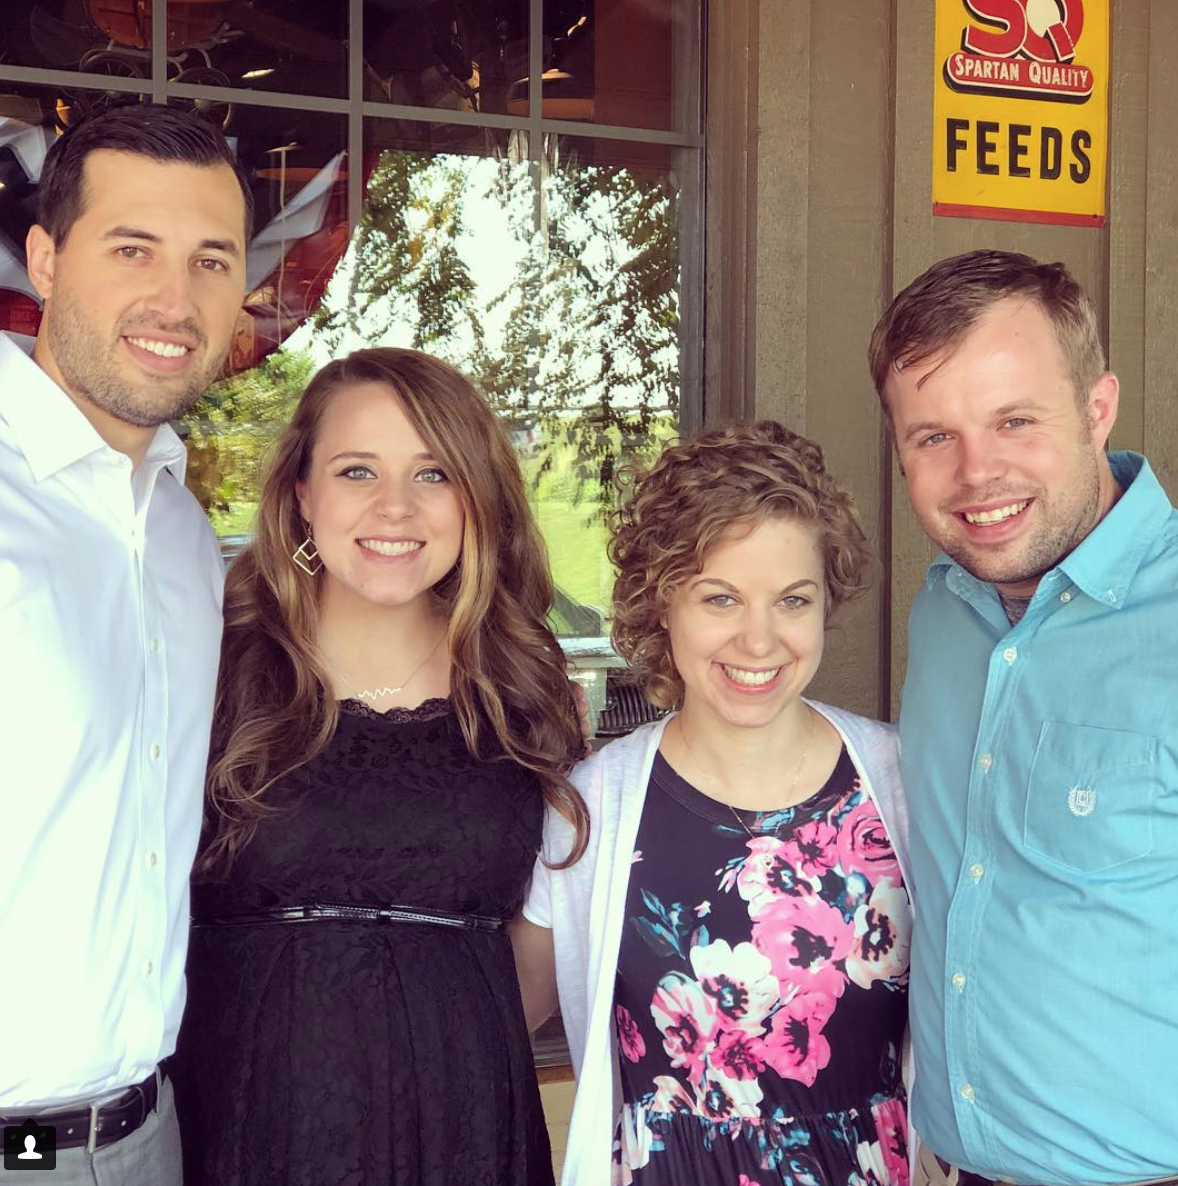 Jinger Duggar Attacked For Dyeing Hair When Pregnant